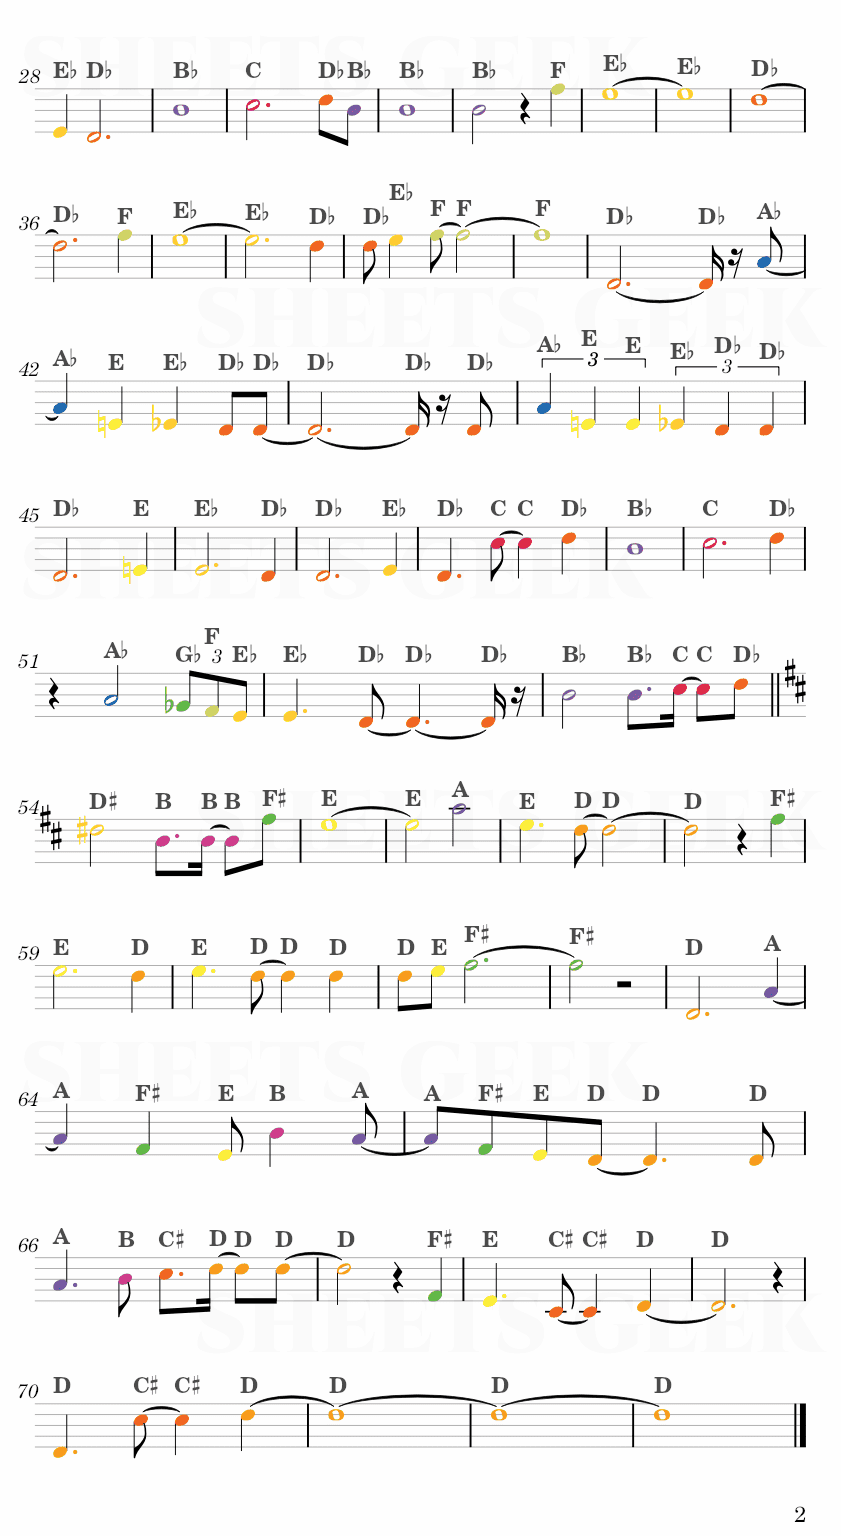 Give it Back - Jujutsu Kaisen Ending 2 Easy Sheet Music Free for piano, keyboard, flute, violin, sax, cello page 2